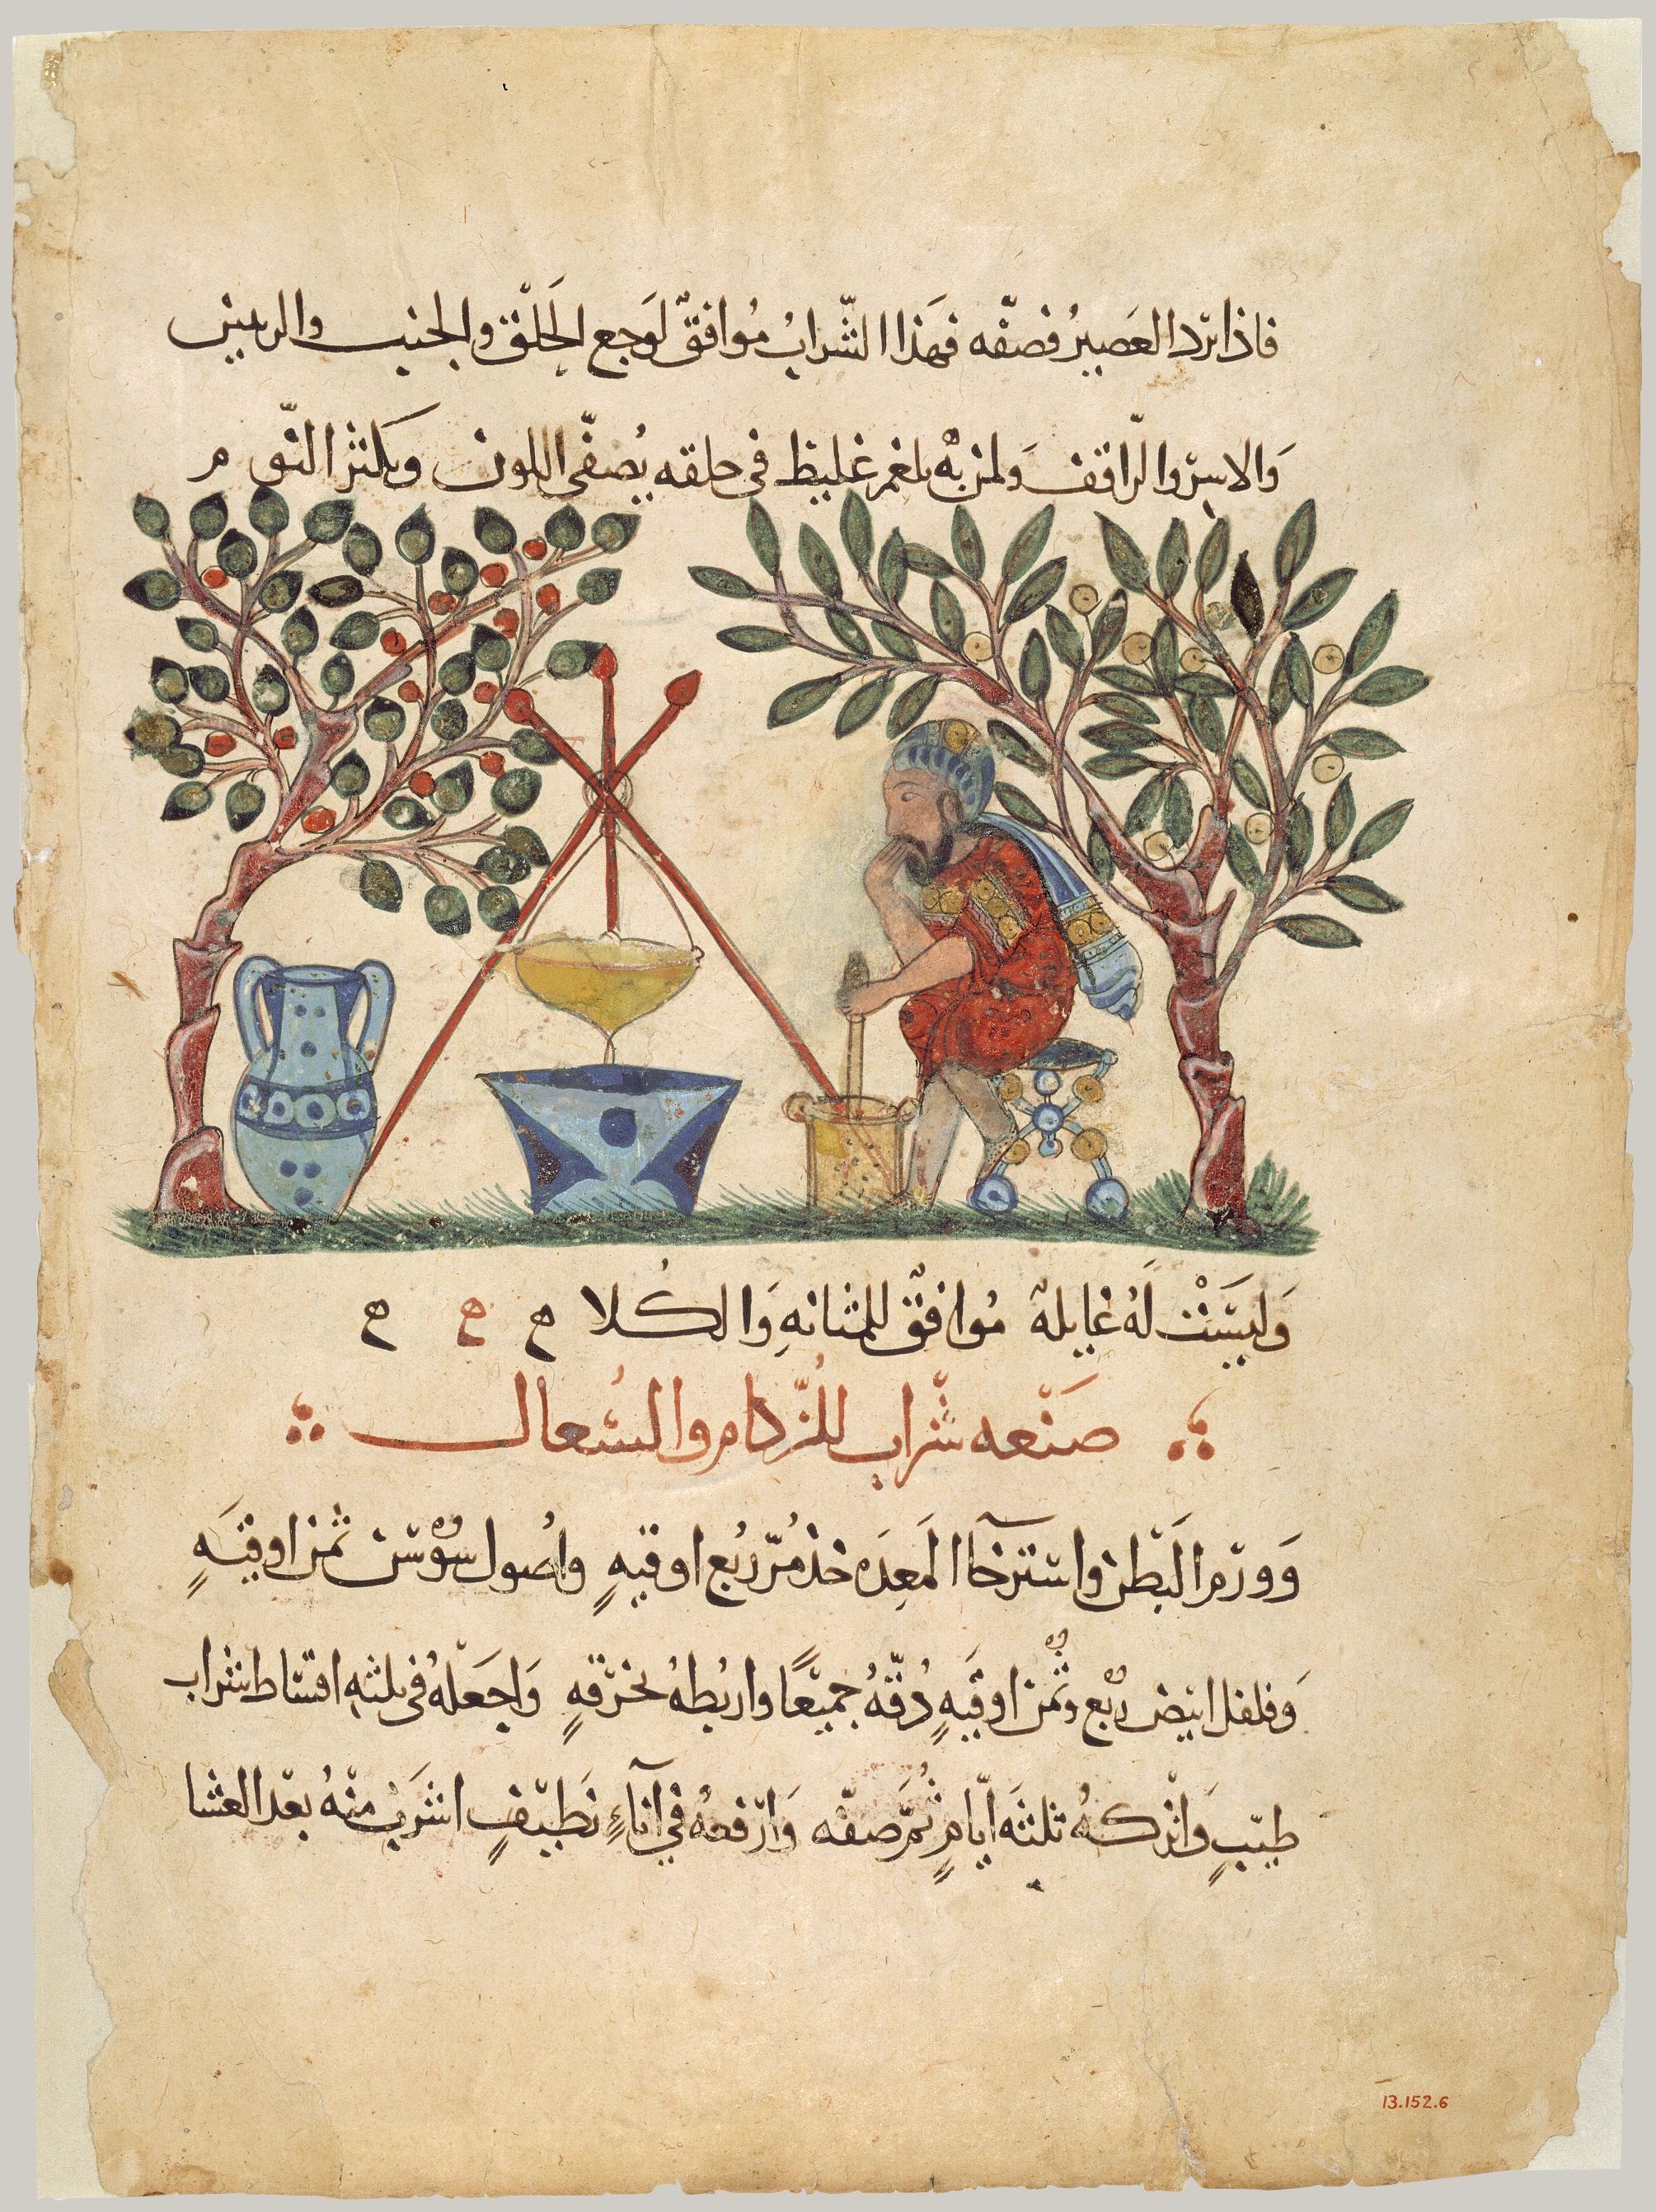 Folio from an Arabic manuscript copy of Dioscorides' De Materia Medica: An illustration of a doctor clad in a red robe stewing a pot, another pot hangs over a coal brazier next to an amphora. The scene takes place between two trees and is surrounded by Arabic text.